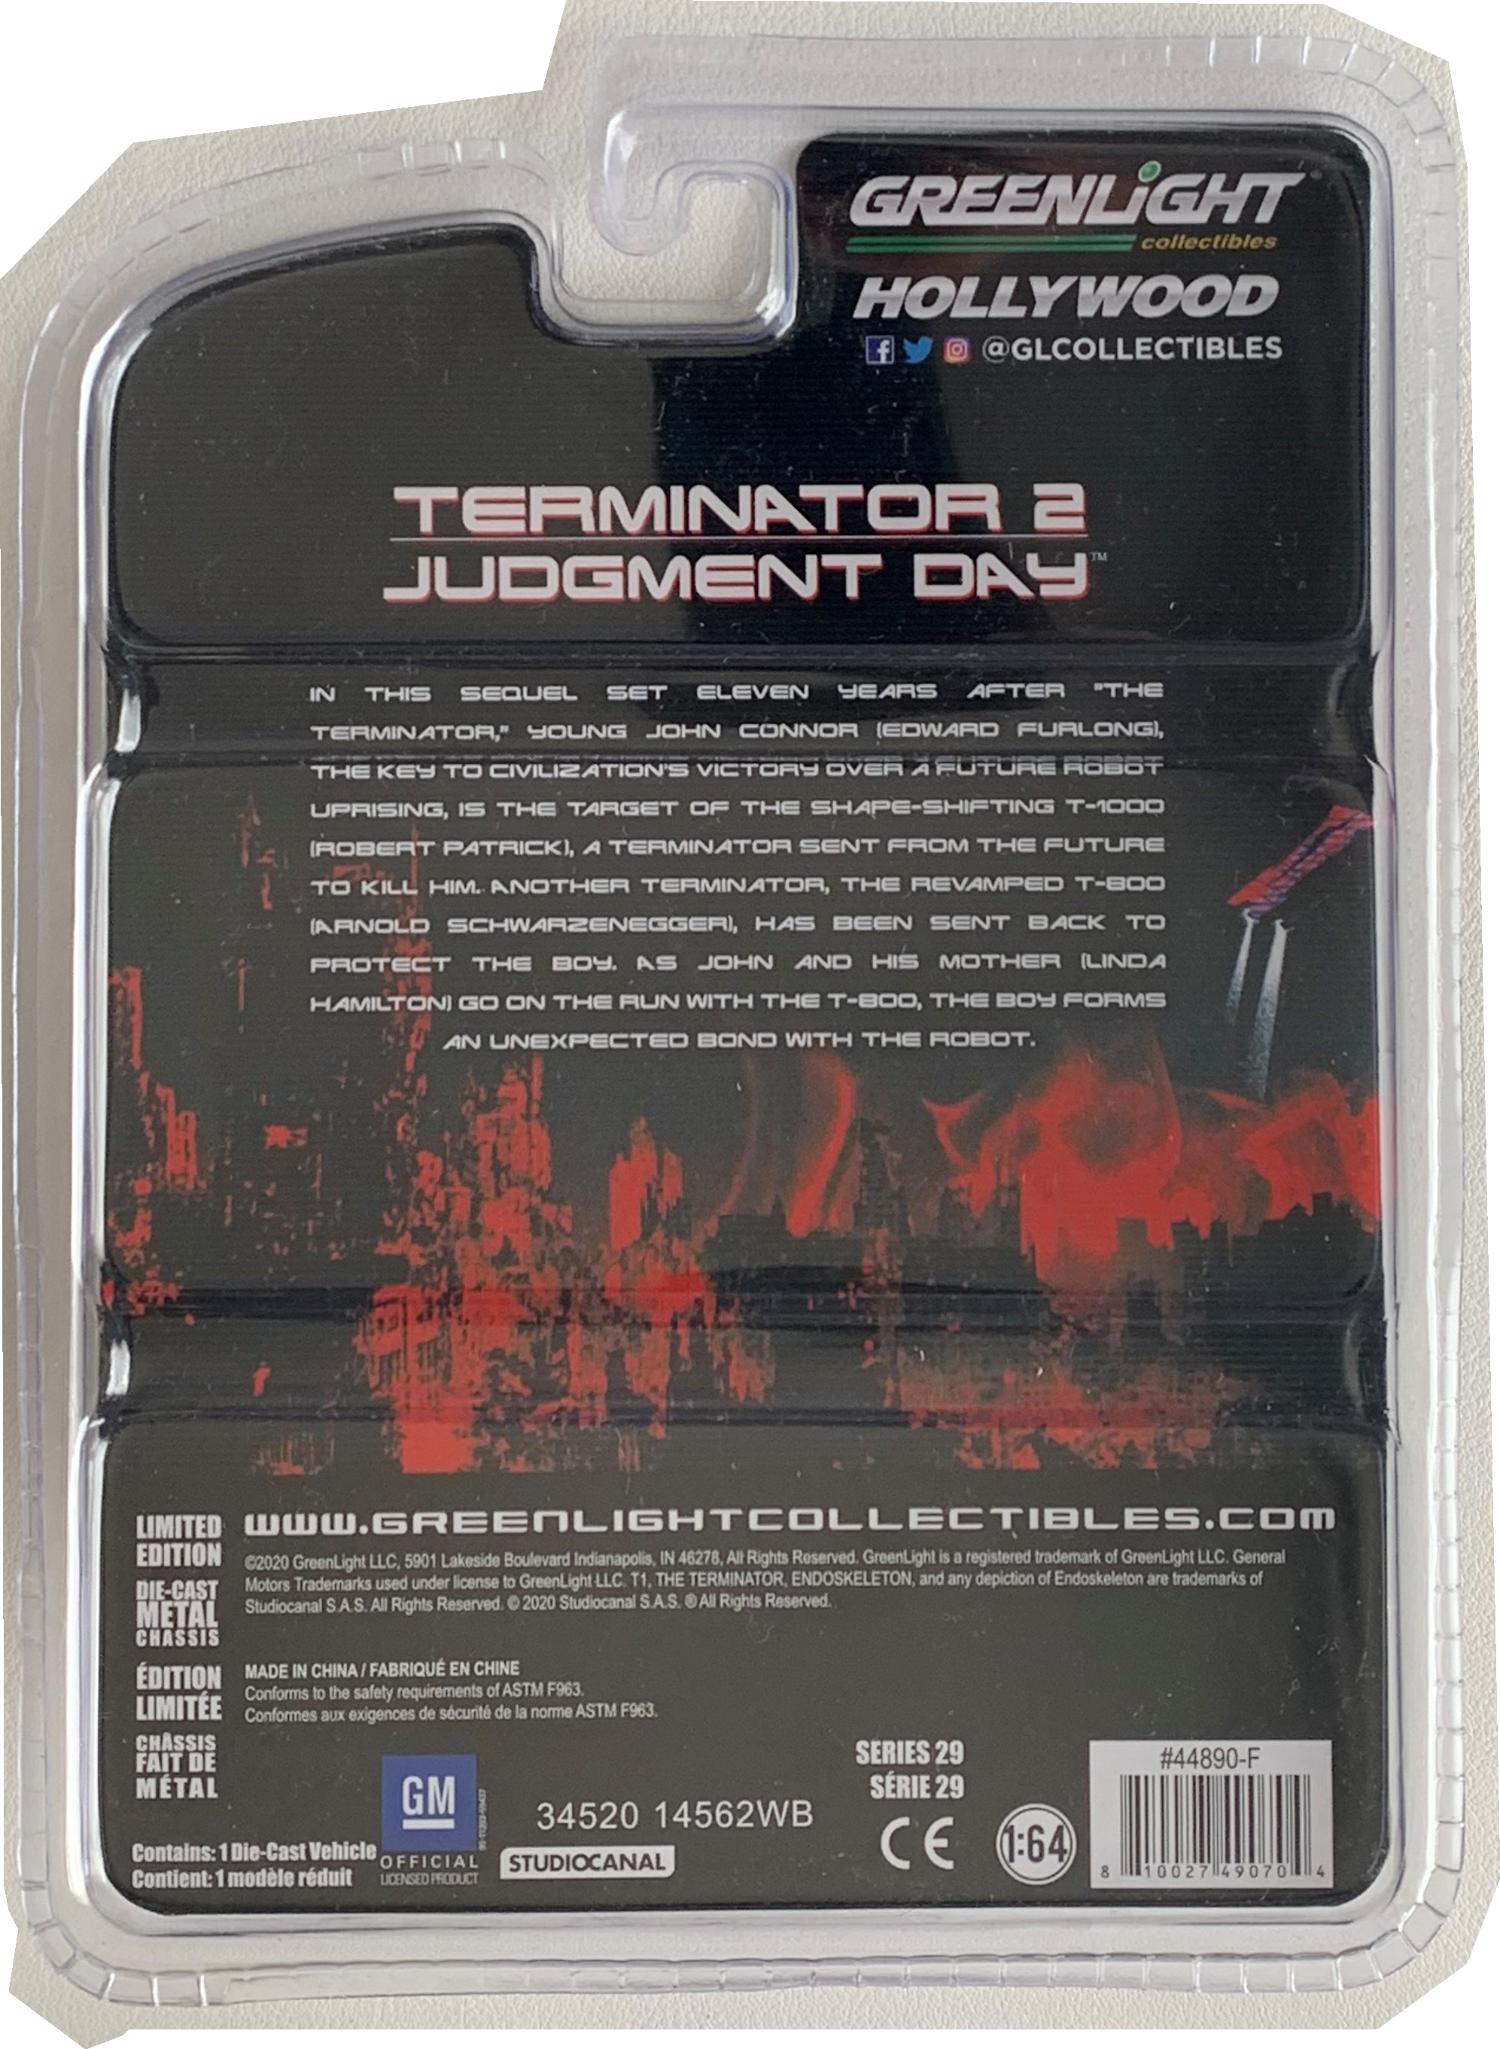 Terminator 2 Judgment Day 1987 Chevrolet Caprice police car 1:64 scale model from Greenlight Hollywood, limited edition model